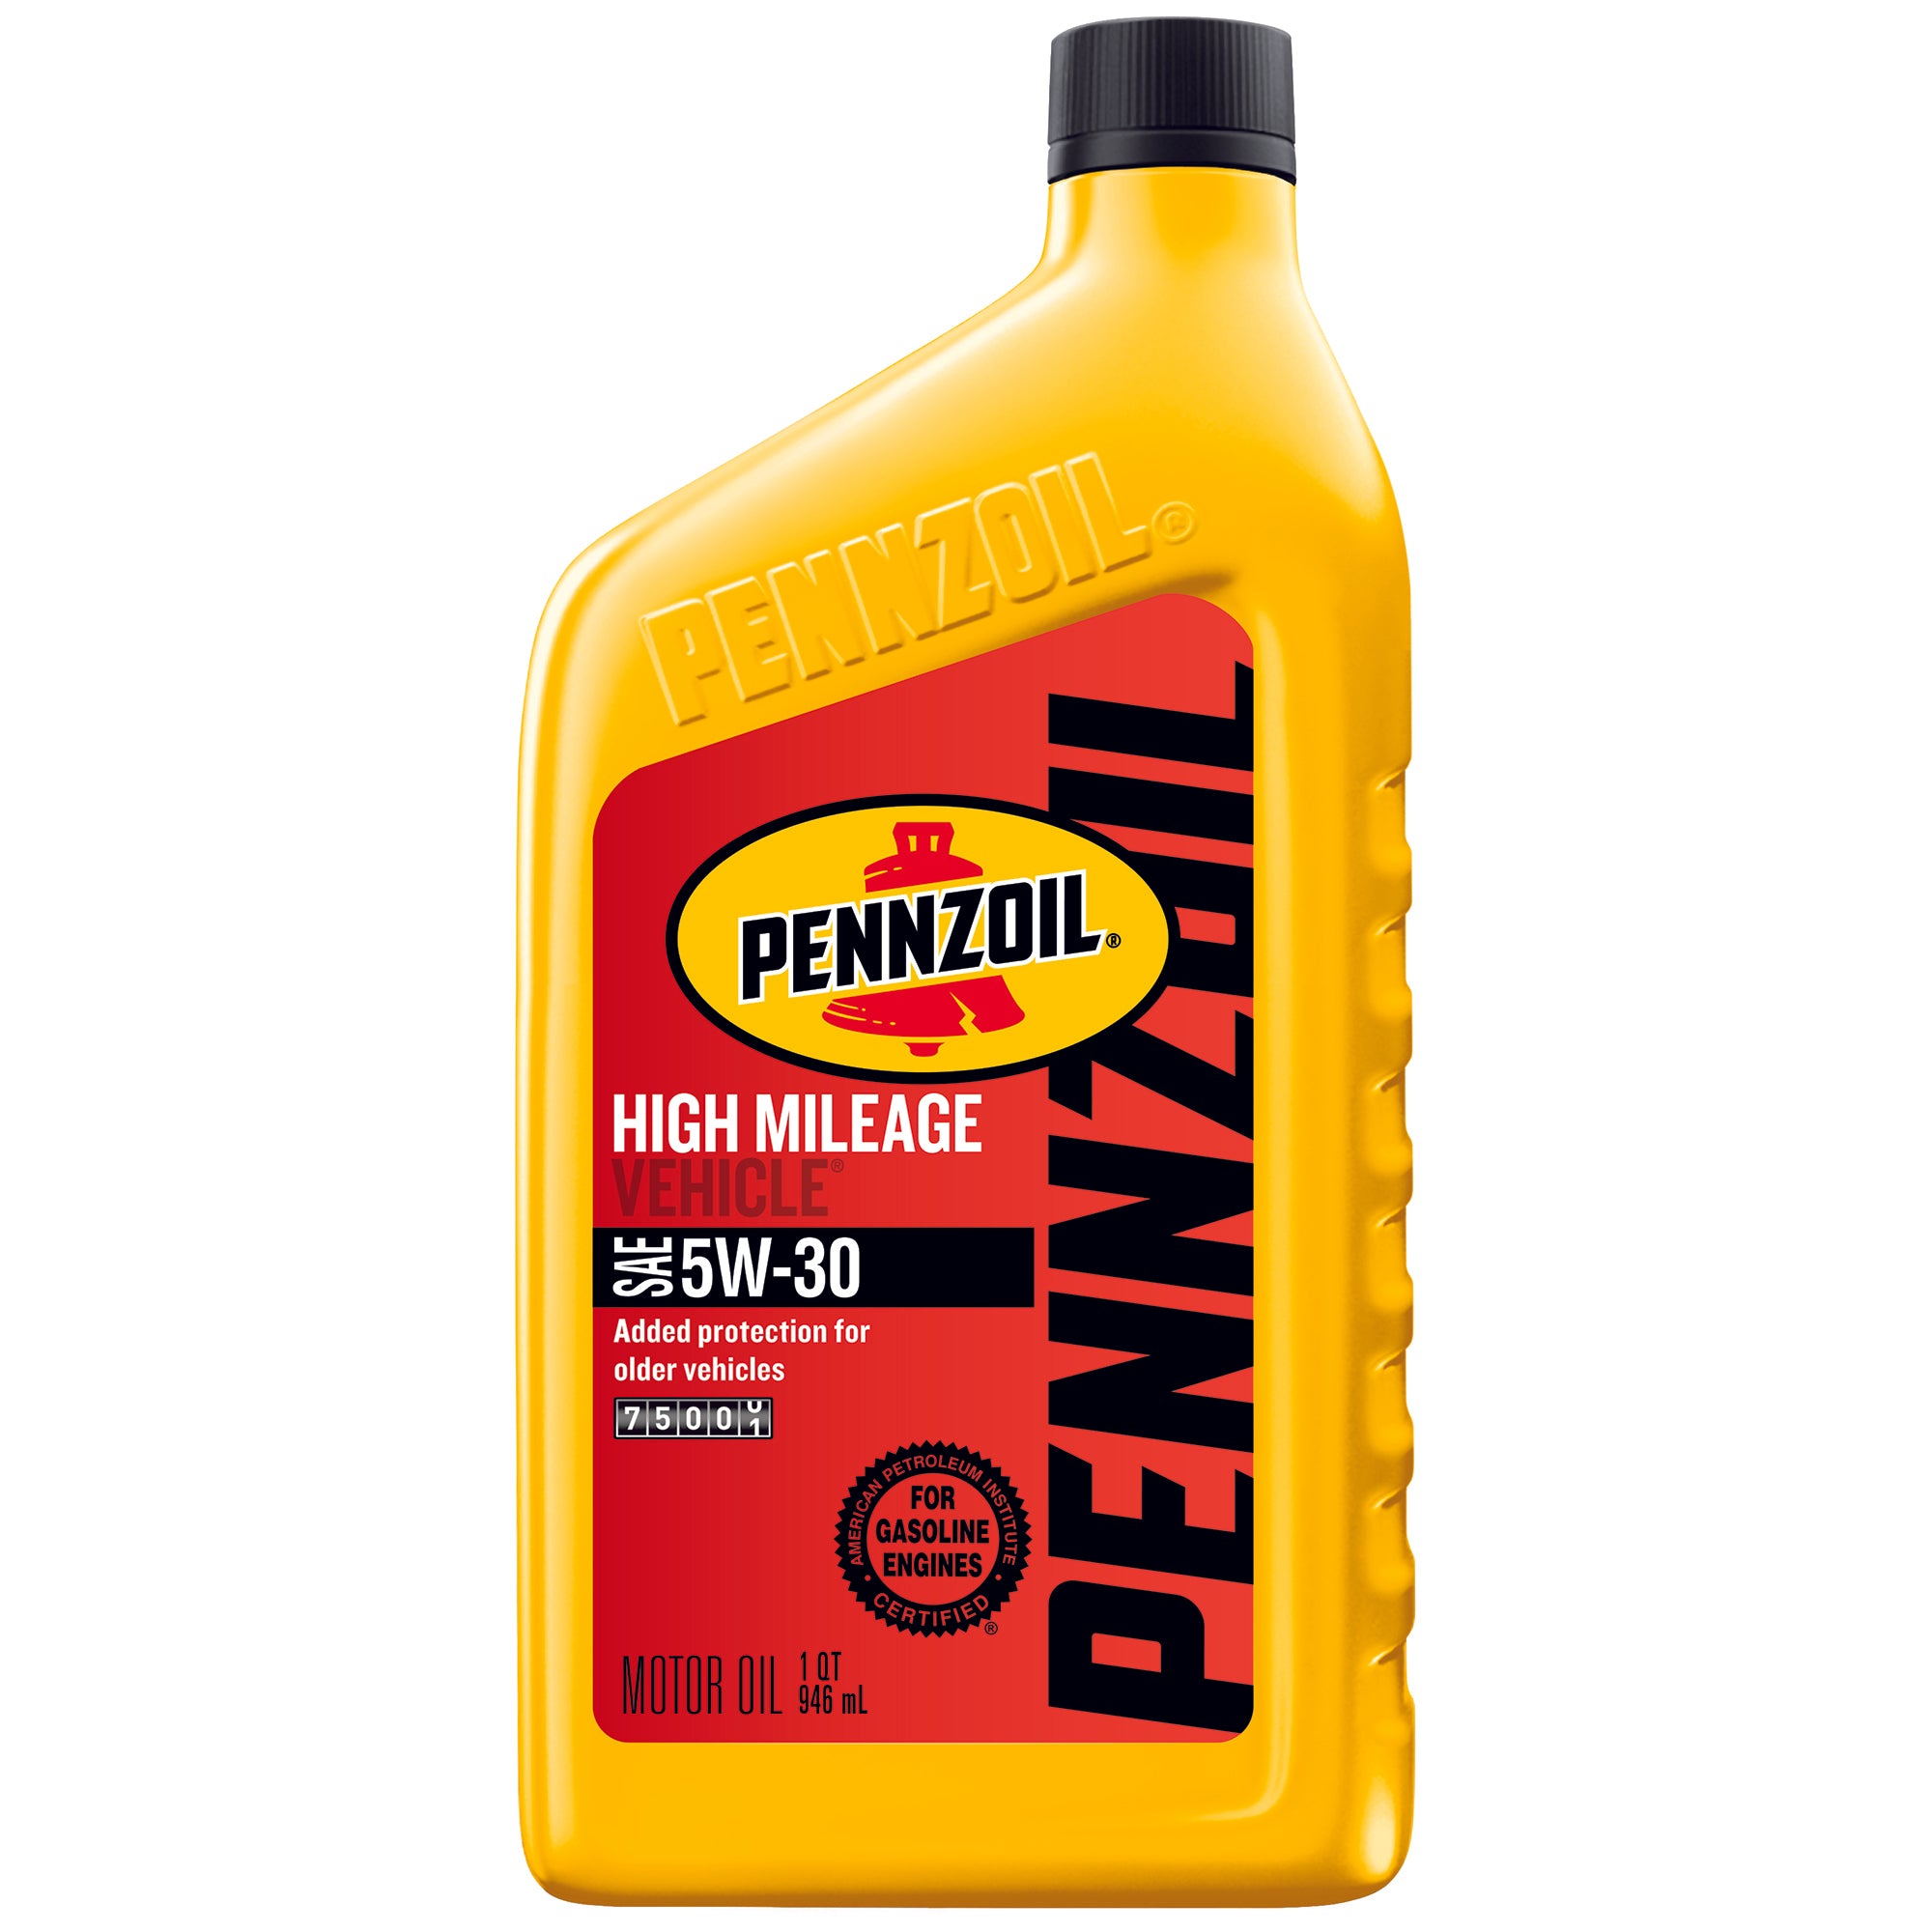 Pennzoil High Mileage Vehicle SAE 5W 30 Motor Oil Case of 6 1 qt